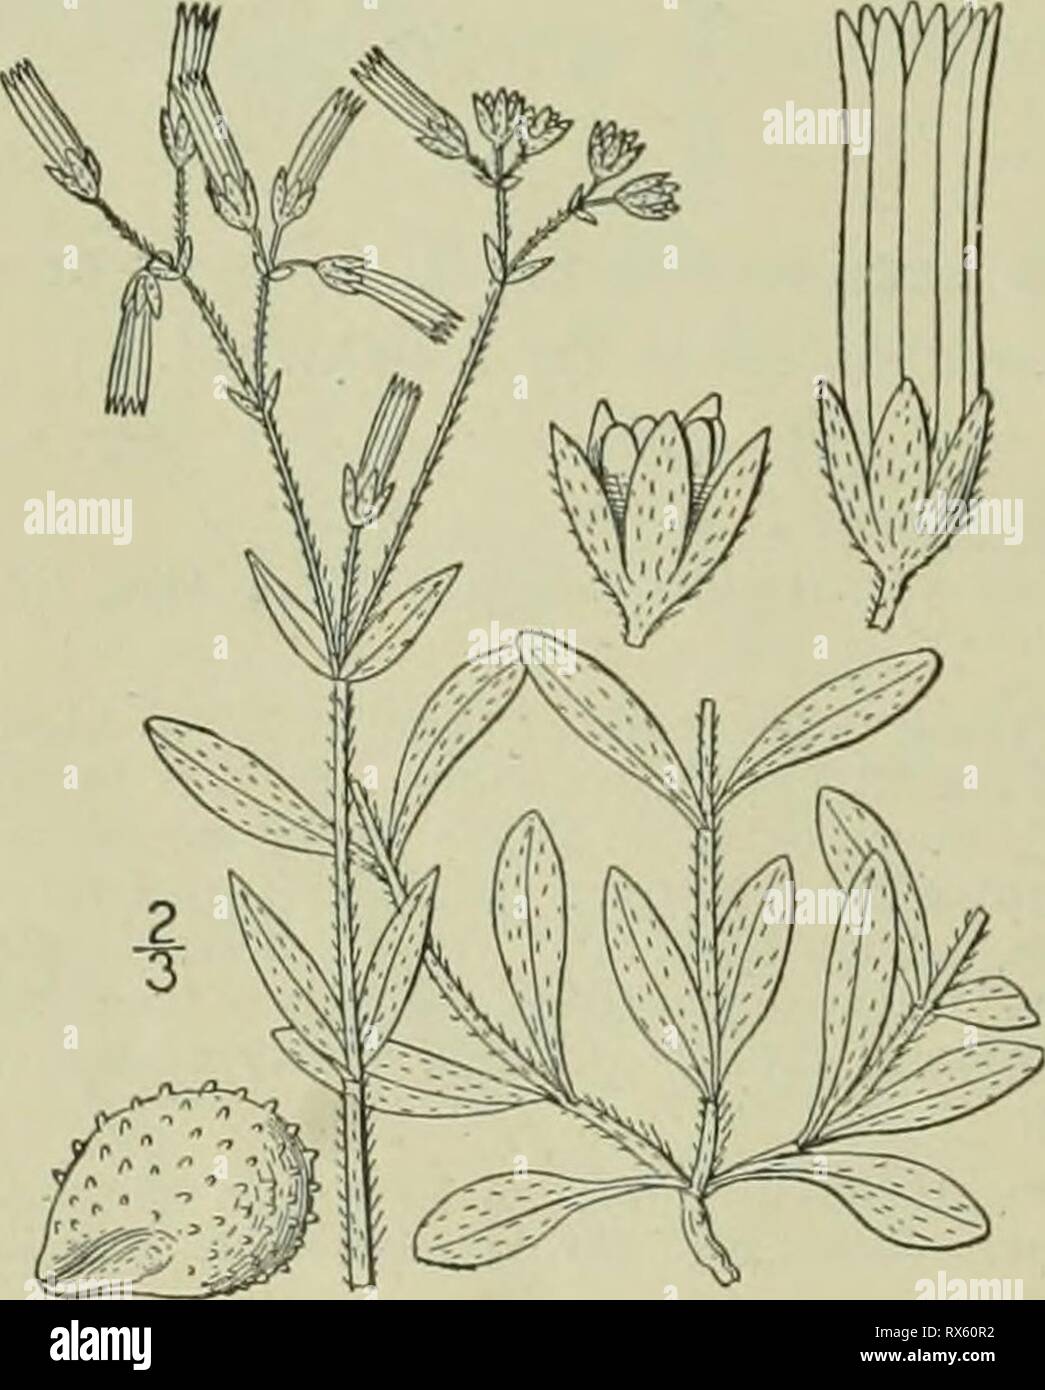 An illustrated flora of the An illustrated flora of the northern United States, Canada and the British possessions : from Newfoundland to the parallel of the southern boundary of Virginia and from the Atlantic Ocean westward to the 102nd meridian ed2illustratedflo02brit Year: 1913  ?^   5. Cerastium brachypodum (Engelm.l Robinson. Short-stalked Chickweed. Fig. 1767. Cerastium nutans var. brachypodum Engelm. ; A. Gray. Man. Ed. 5, 94. 1867. Cerastium brachypodium Robinson ; Britton, Mem. Torr. Club 5: 150. 1894. Cerastium 'brachypodium compactum Robinson, Proc. Am. Acad. 29: 278. 1894. Annual,  Stock Photo